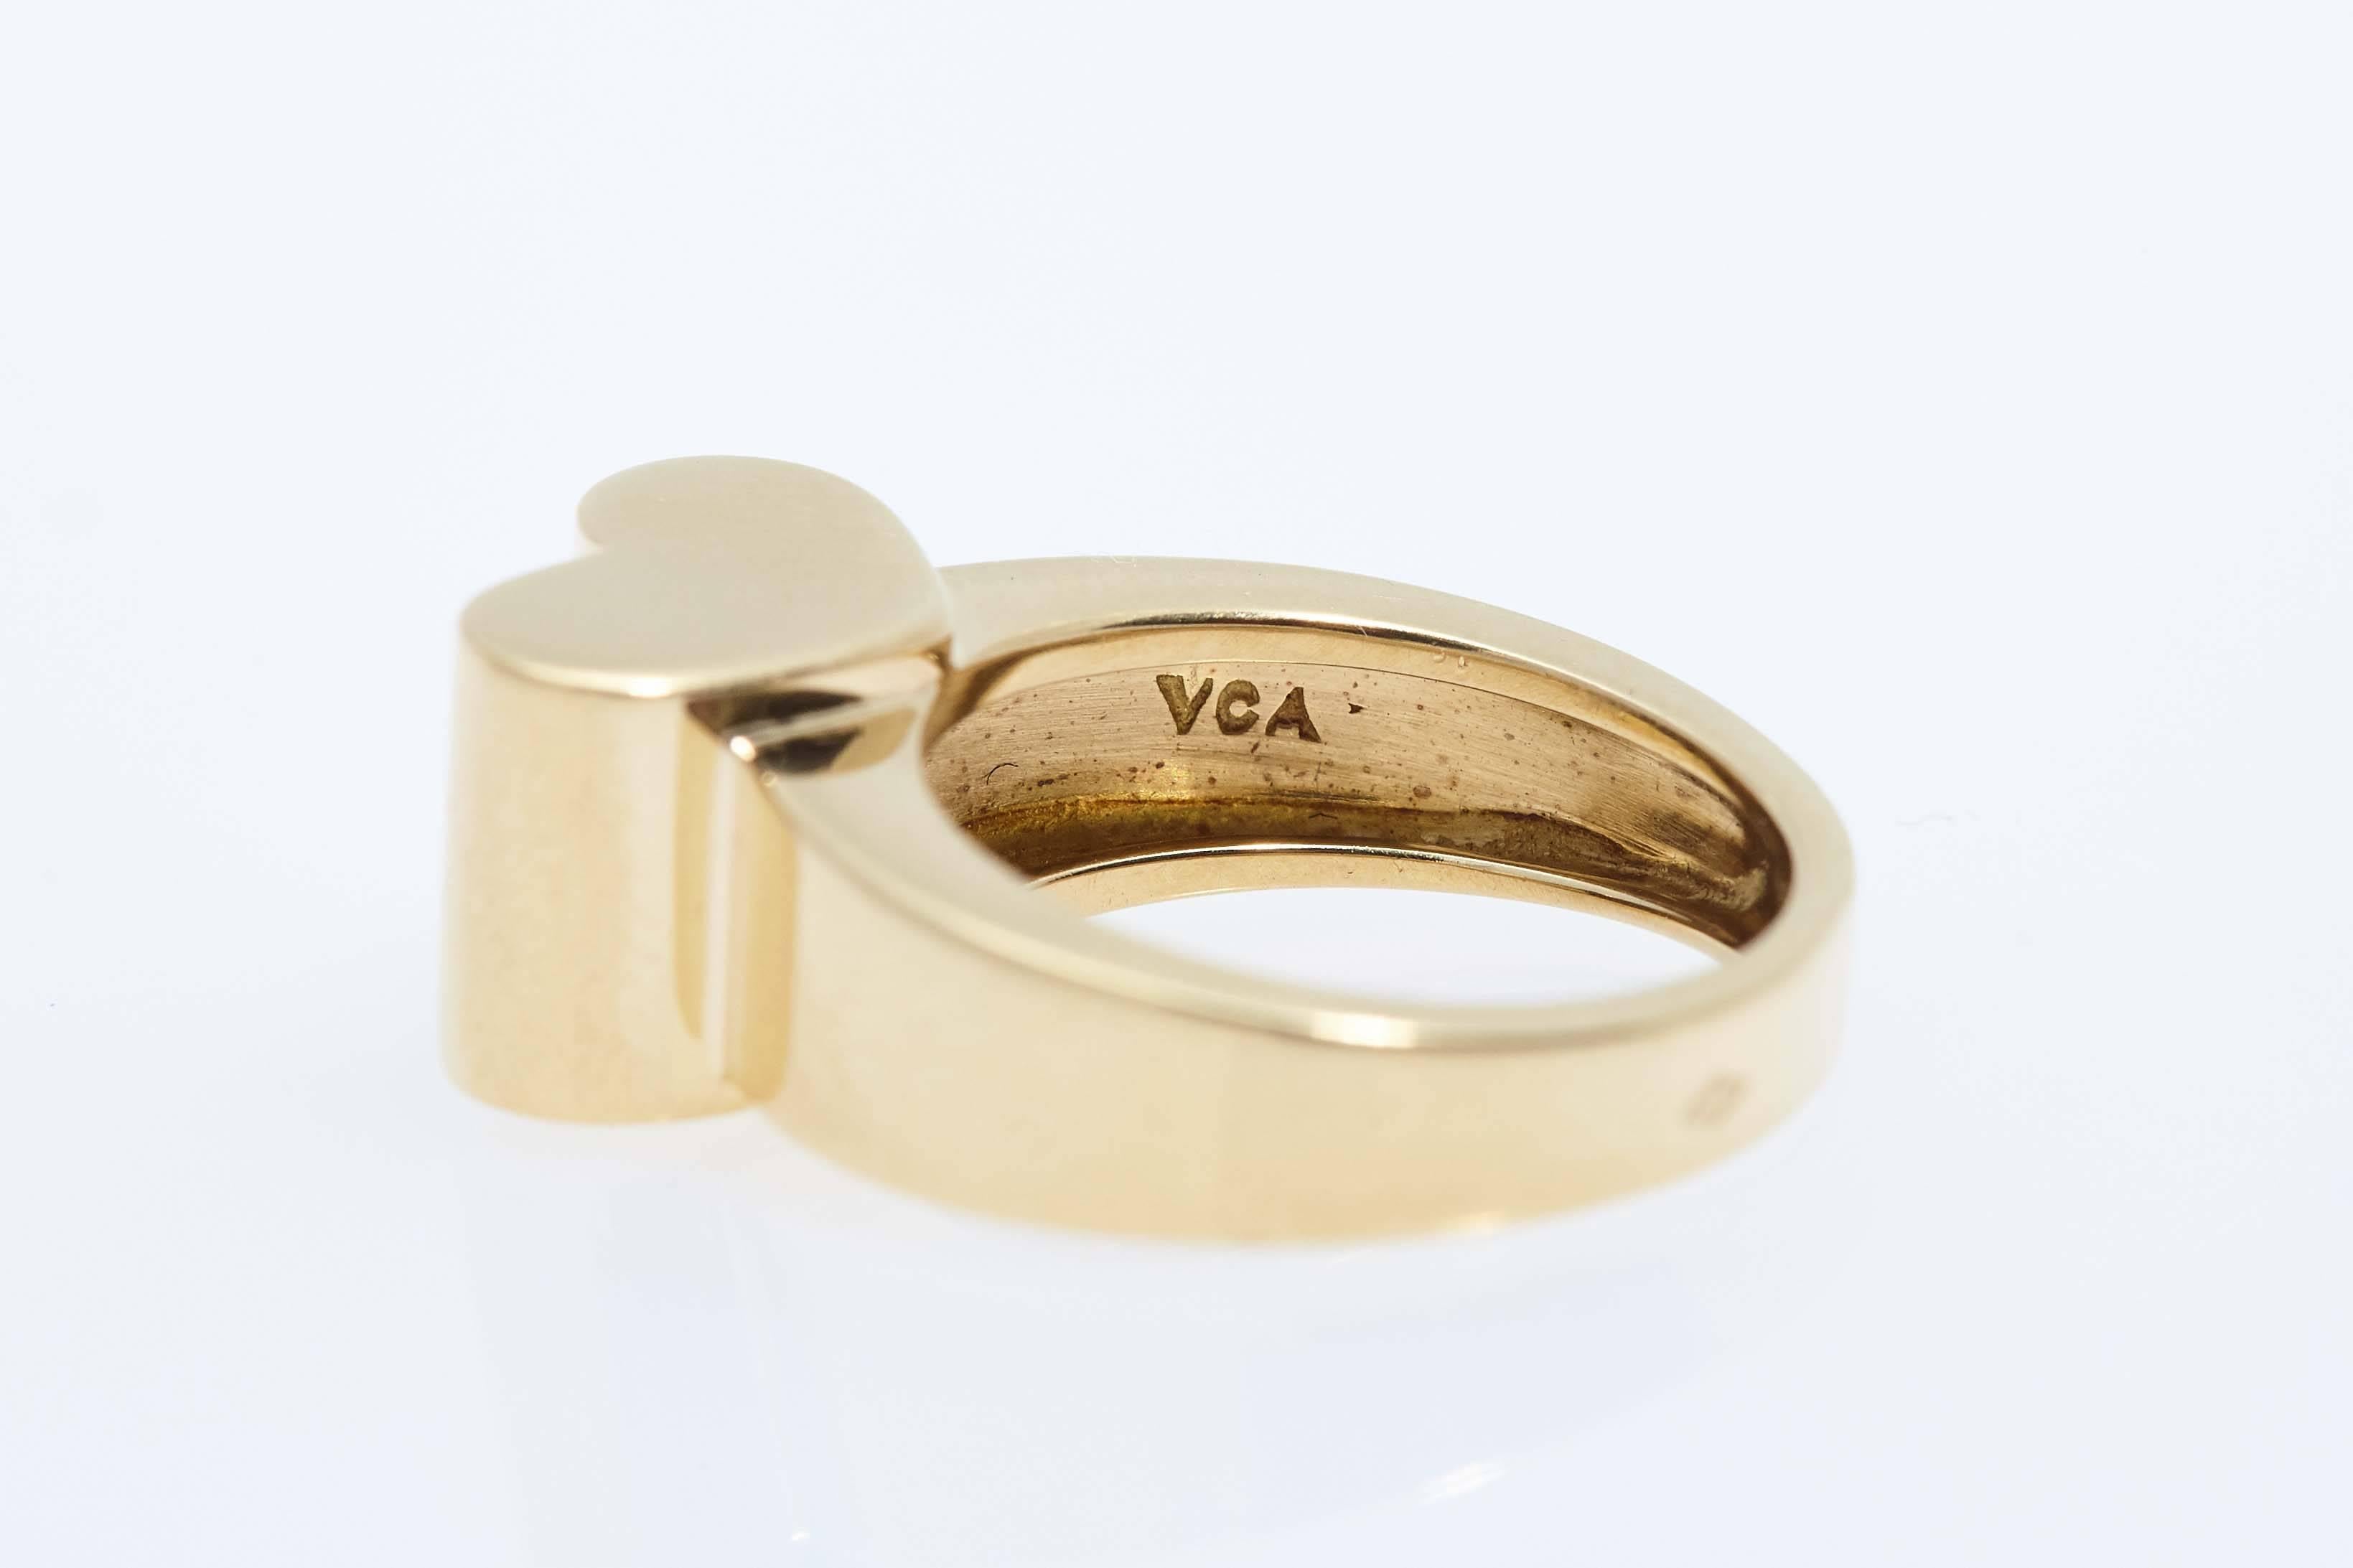 Van Cleef & Arpels eighteen karat yellow gold heart shaped ring with French Hallmarks. The ring measures one inch in height and is size 4 1/4 